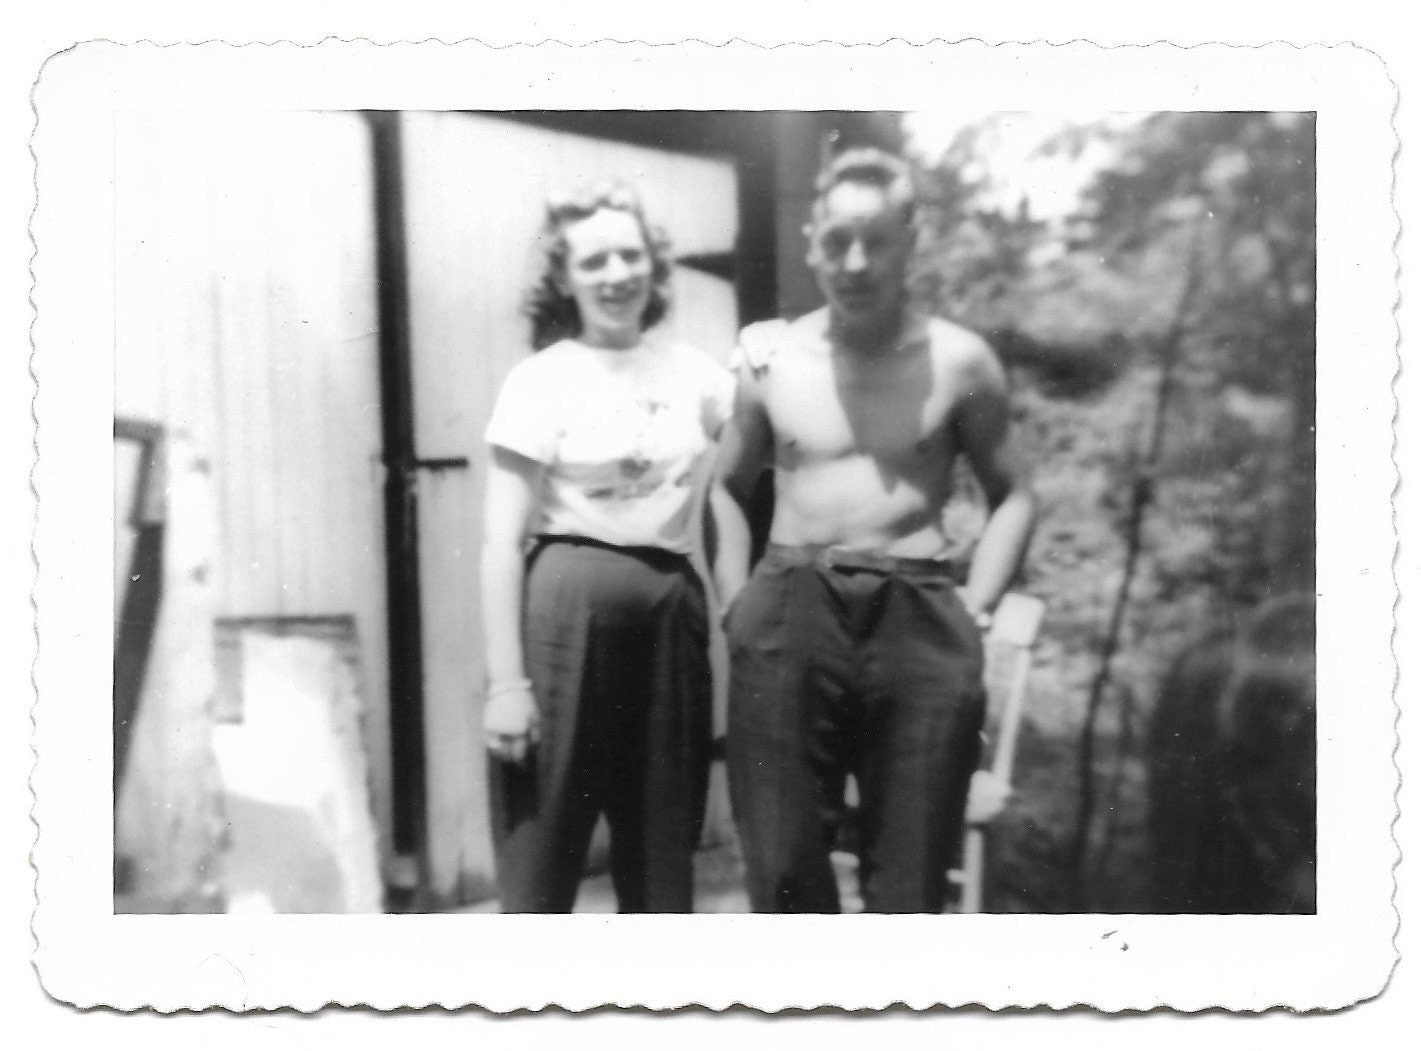 Shirtless Man With Tight Belt Vintage Photo Bare-chested pic